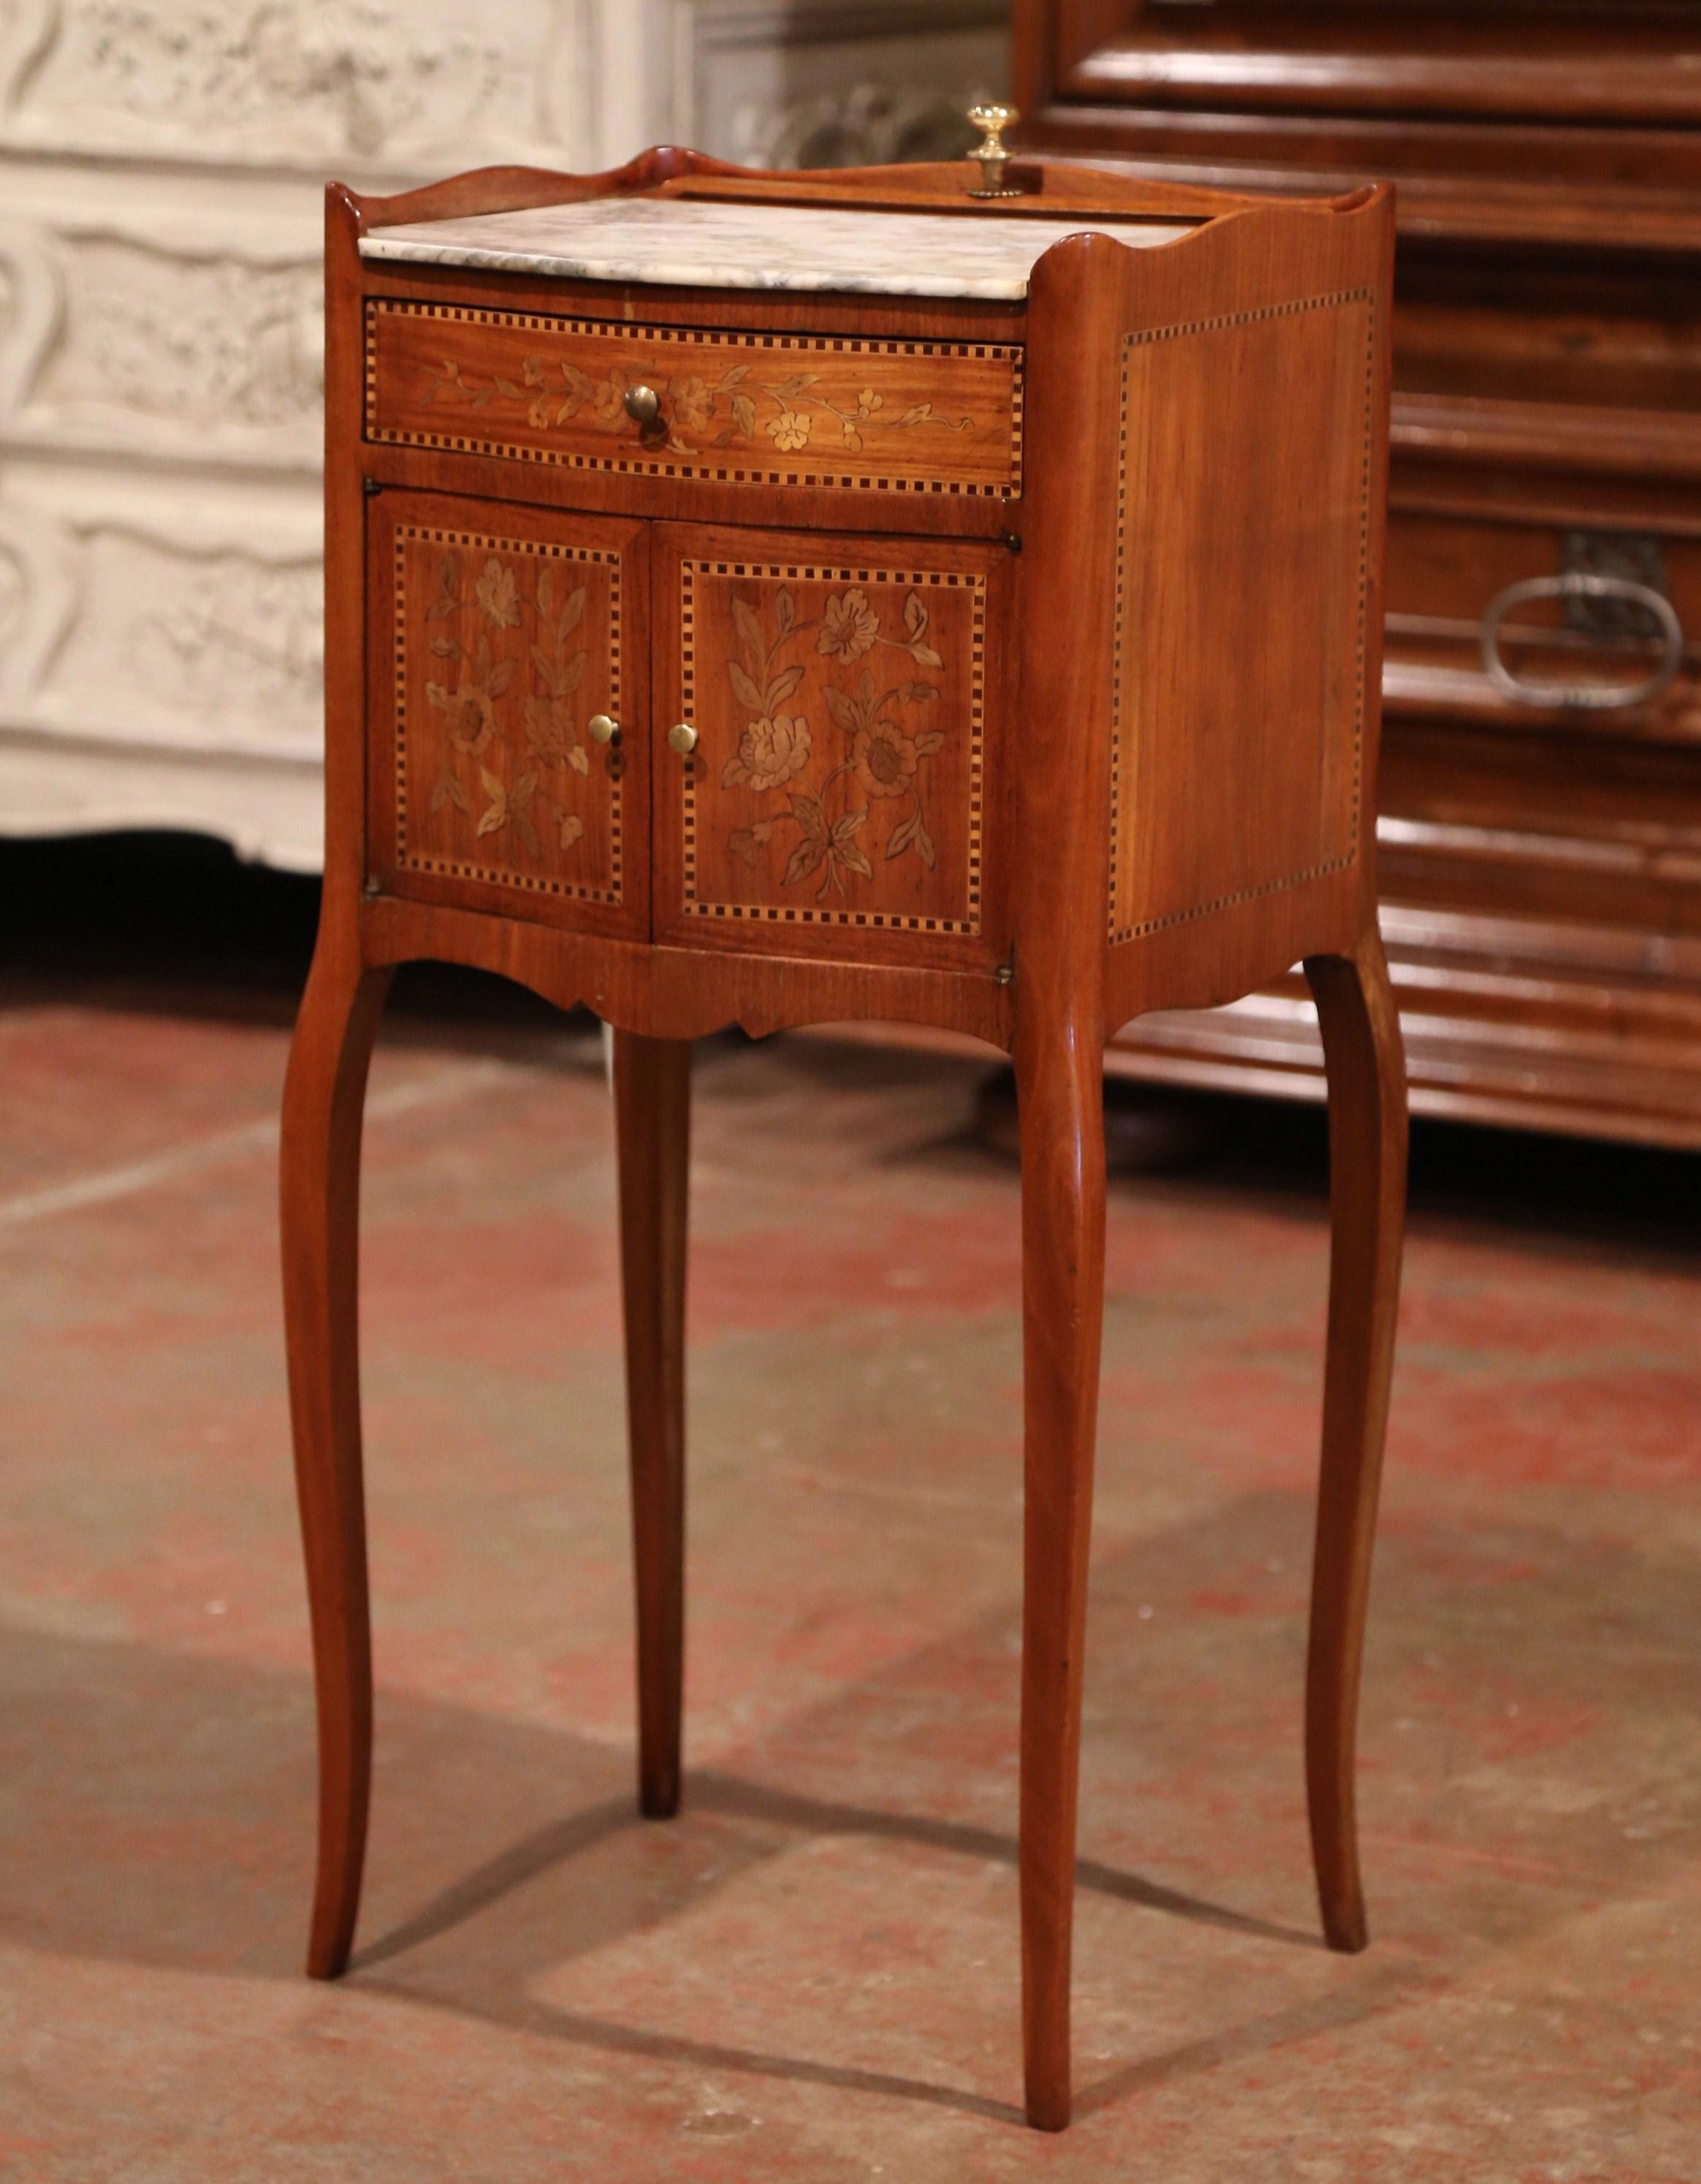 Decorate a powder room or a boudoir with this elegant antique fruitwood cabinet, crafted in France circa 1870, the Louis XV bedside table stands on cabriole legs over a scalloped apron. The bombe front with central drawer features two doors